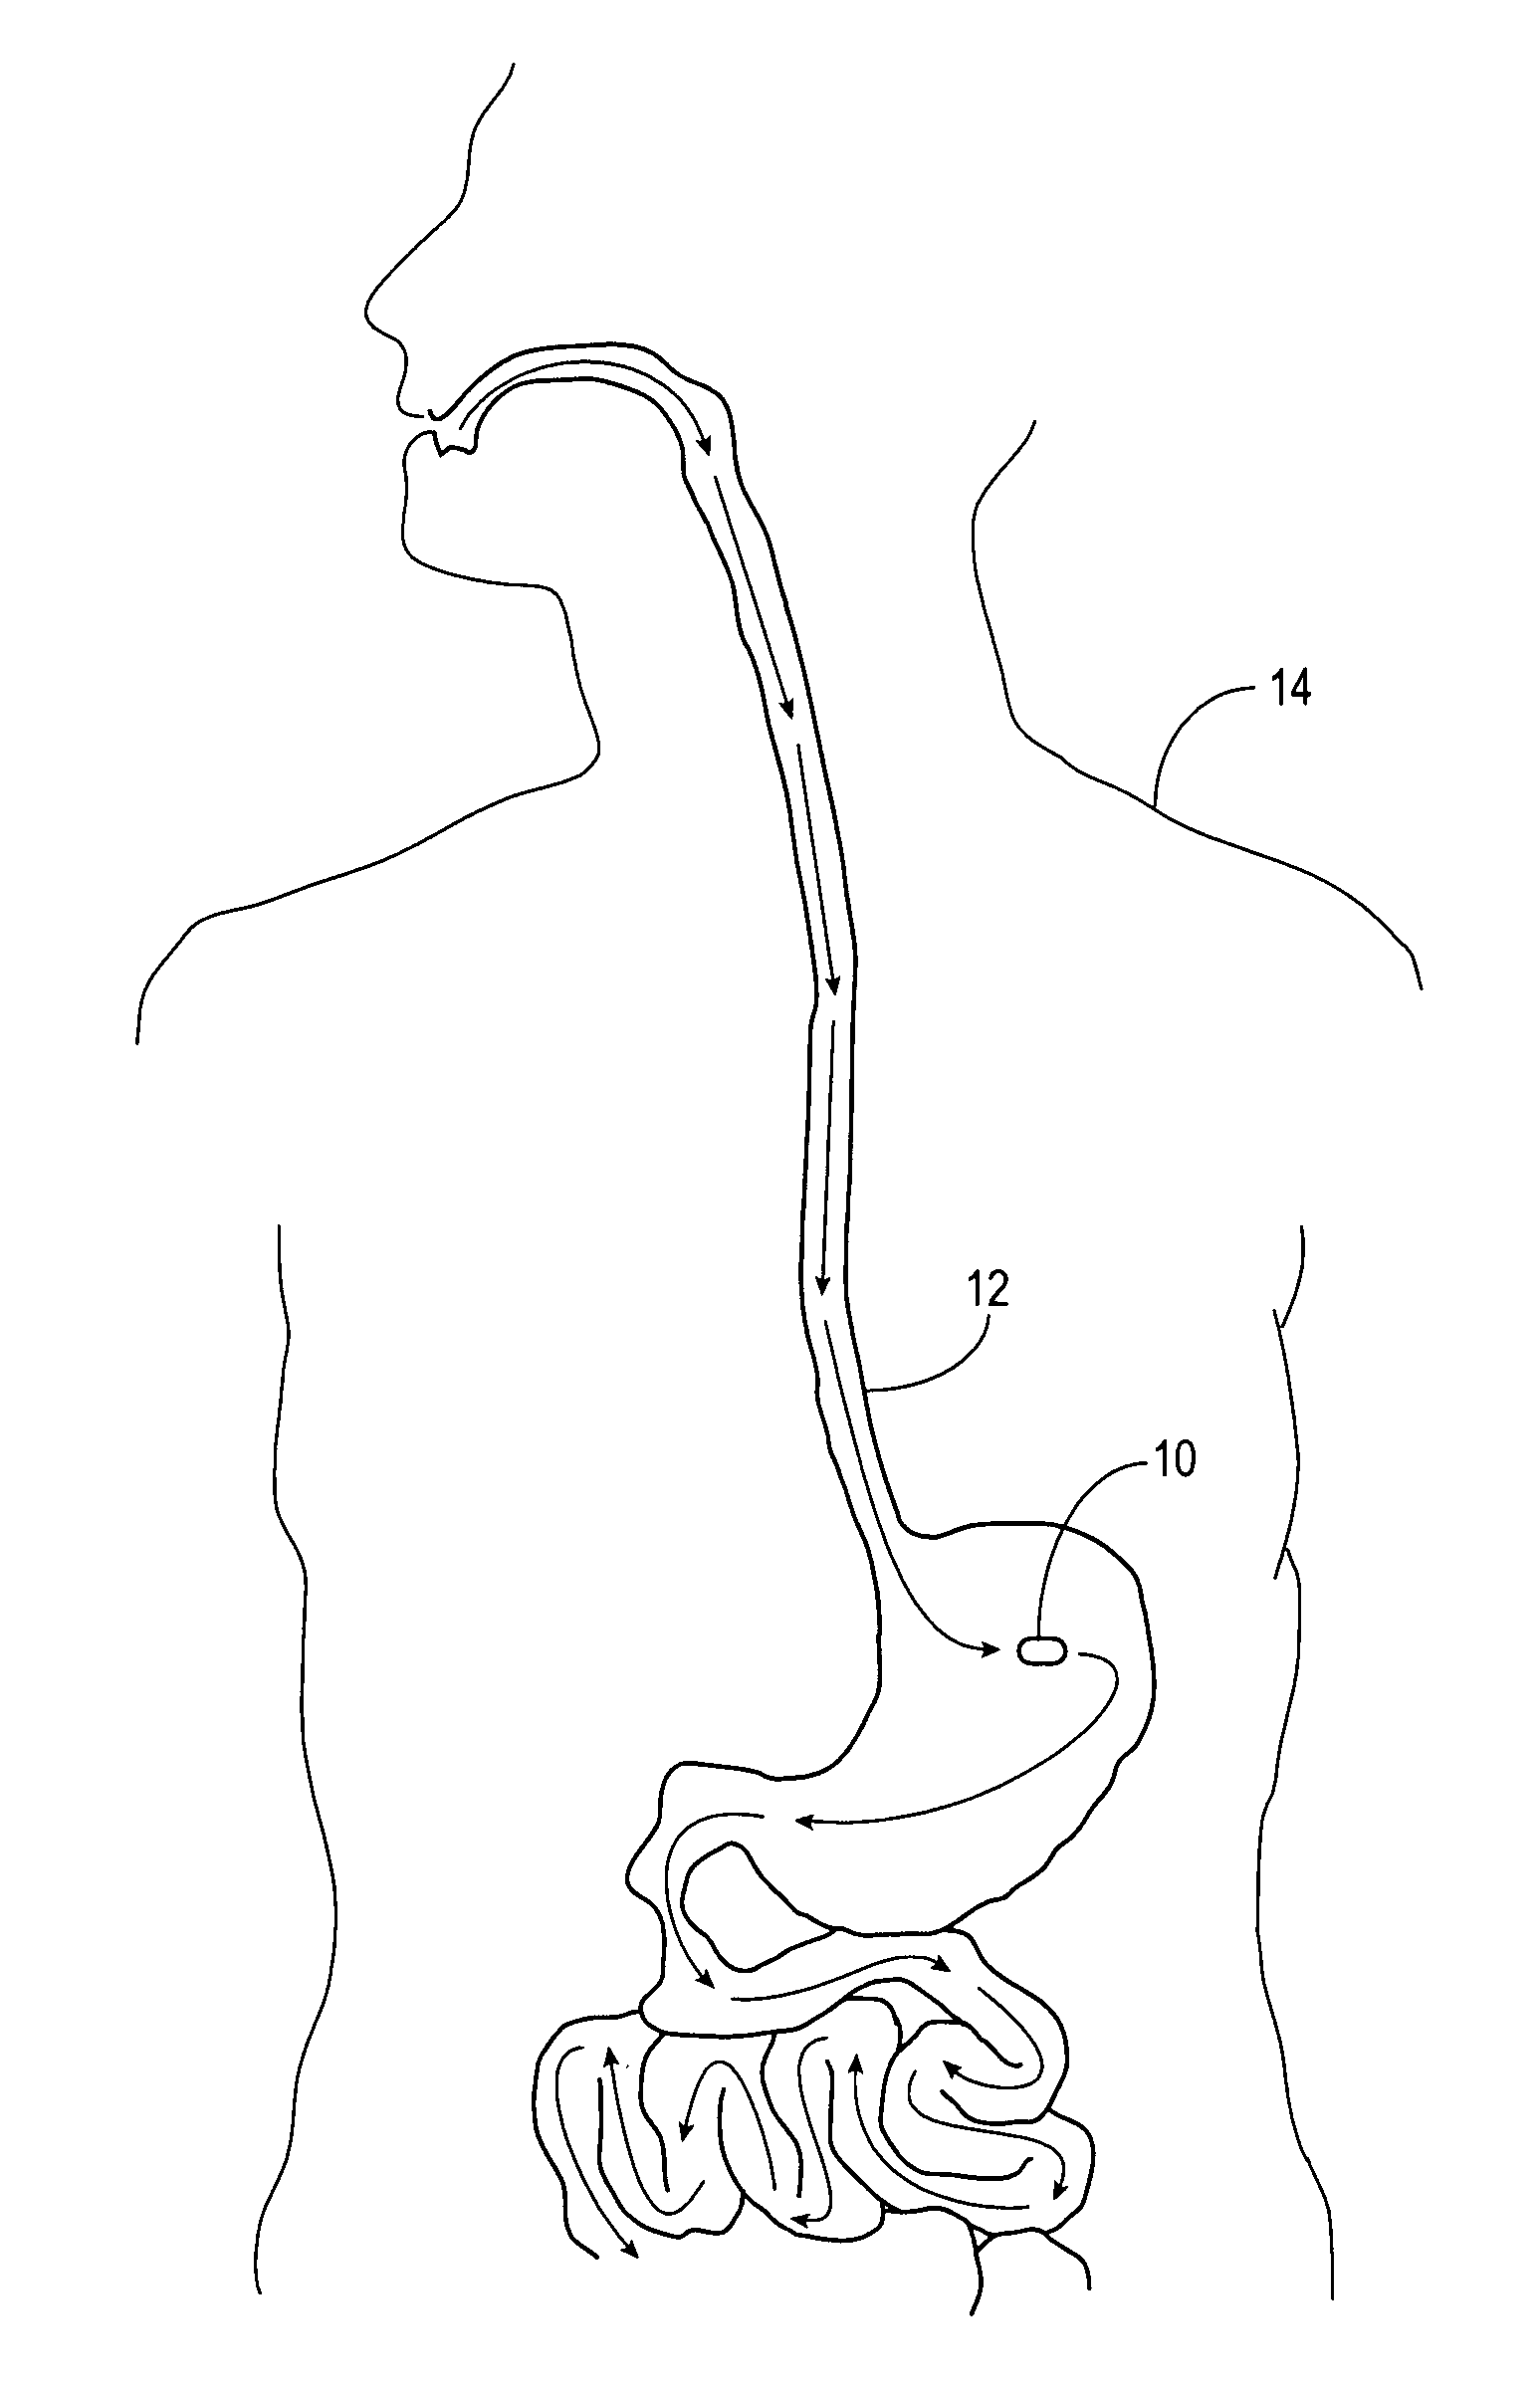 Method of using a gastrointestinal stimulator device for digestive and eating disorders